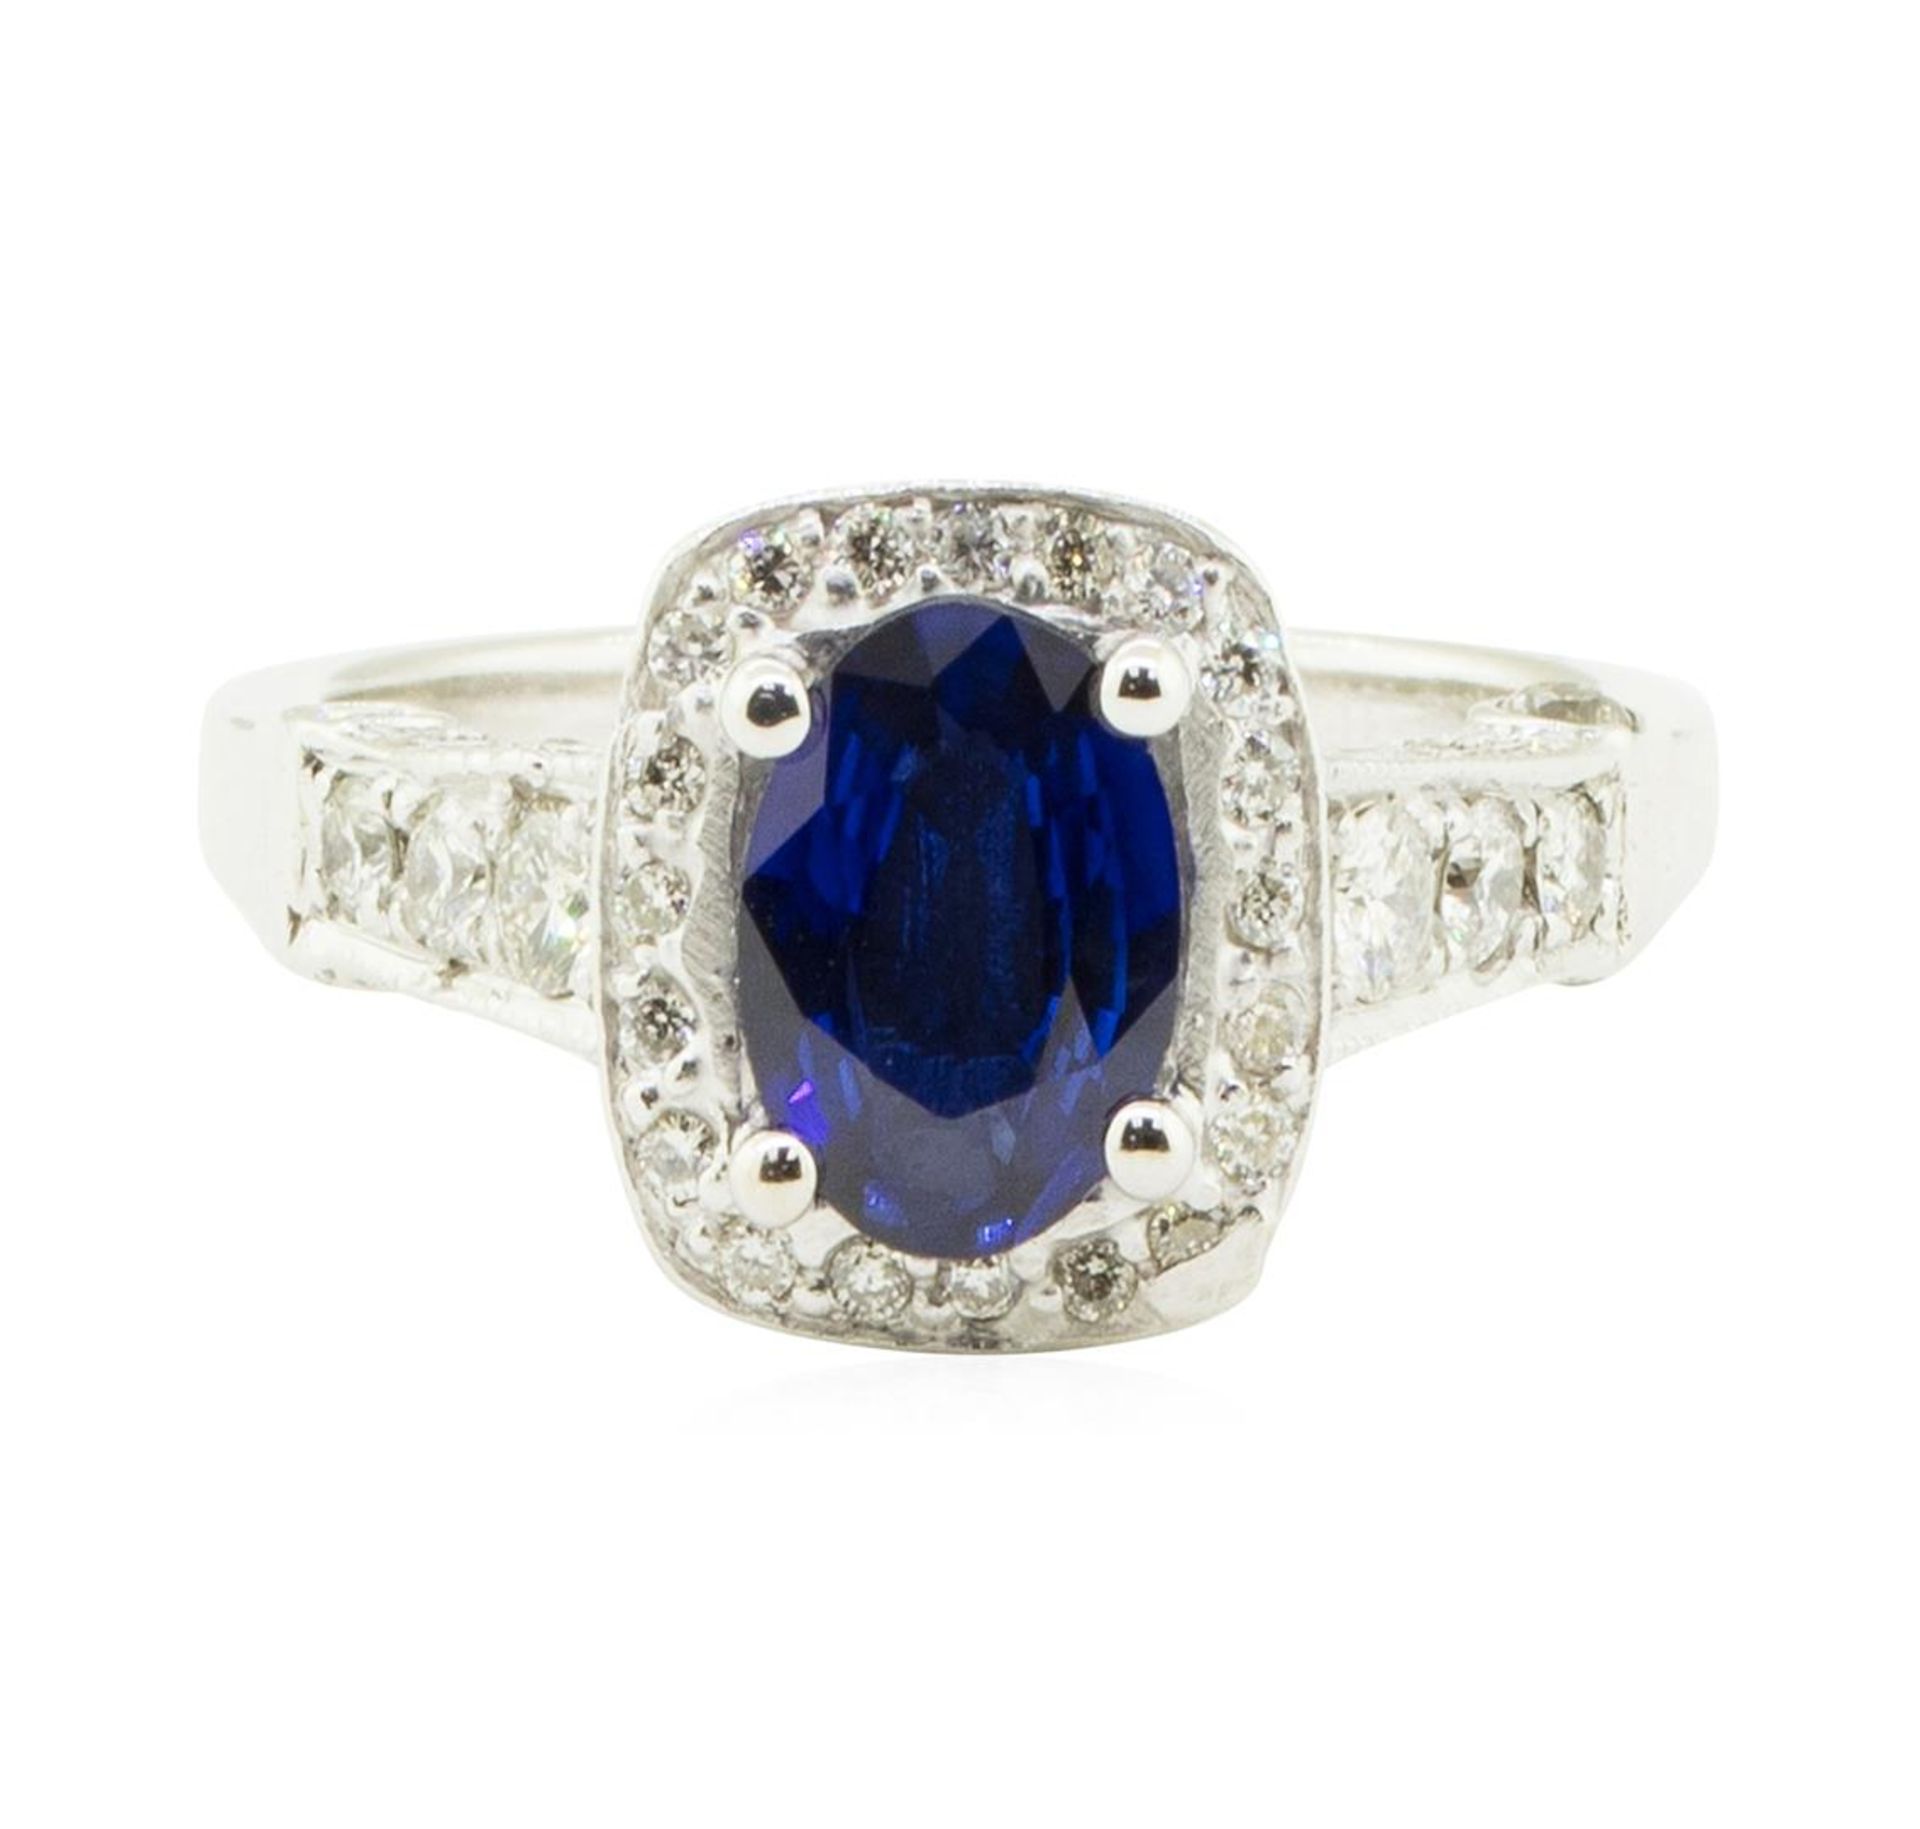 1.90 ctw Oval Brilliant Blue Sapphire And Diamond Ring - 14KT White Gold - Image 2 of 5